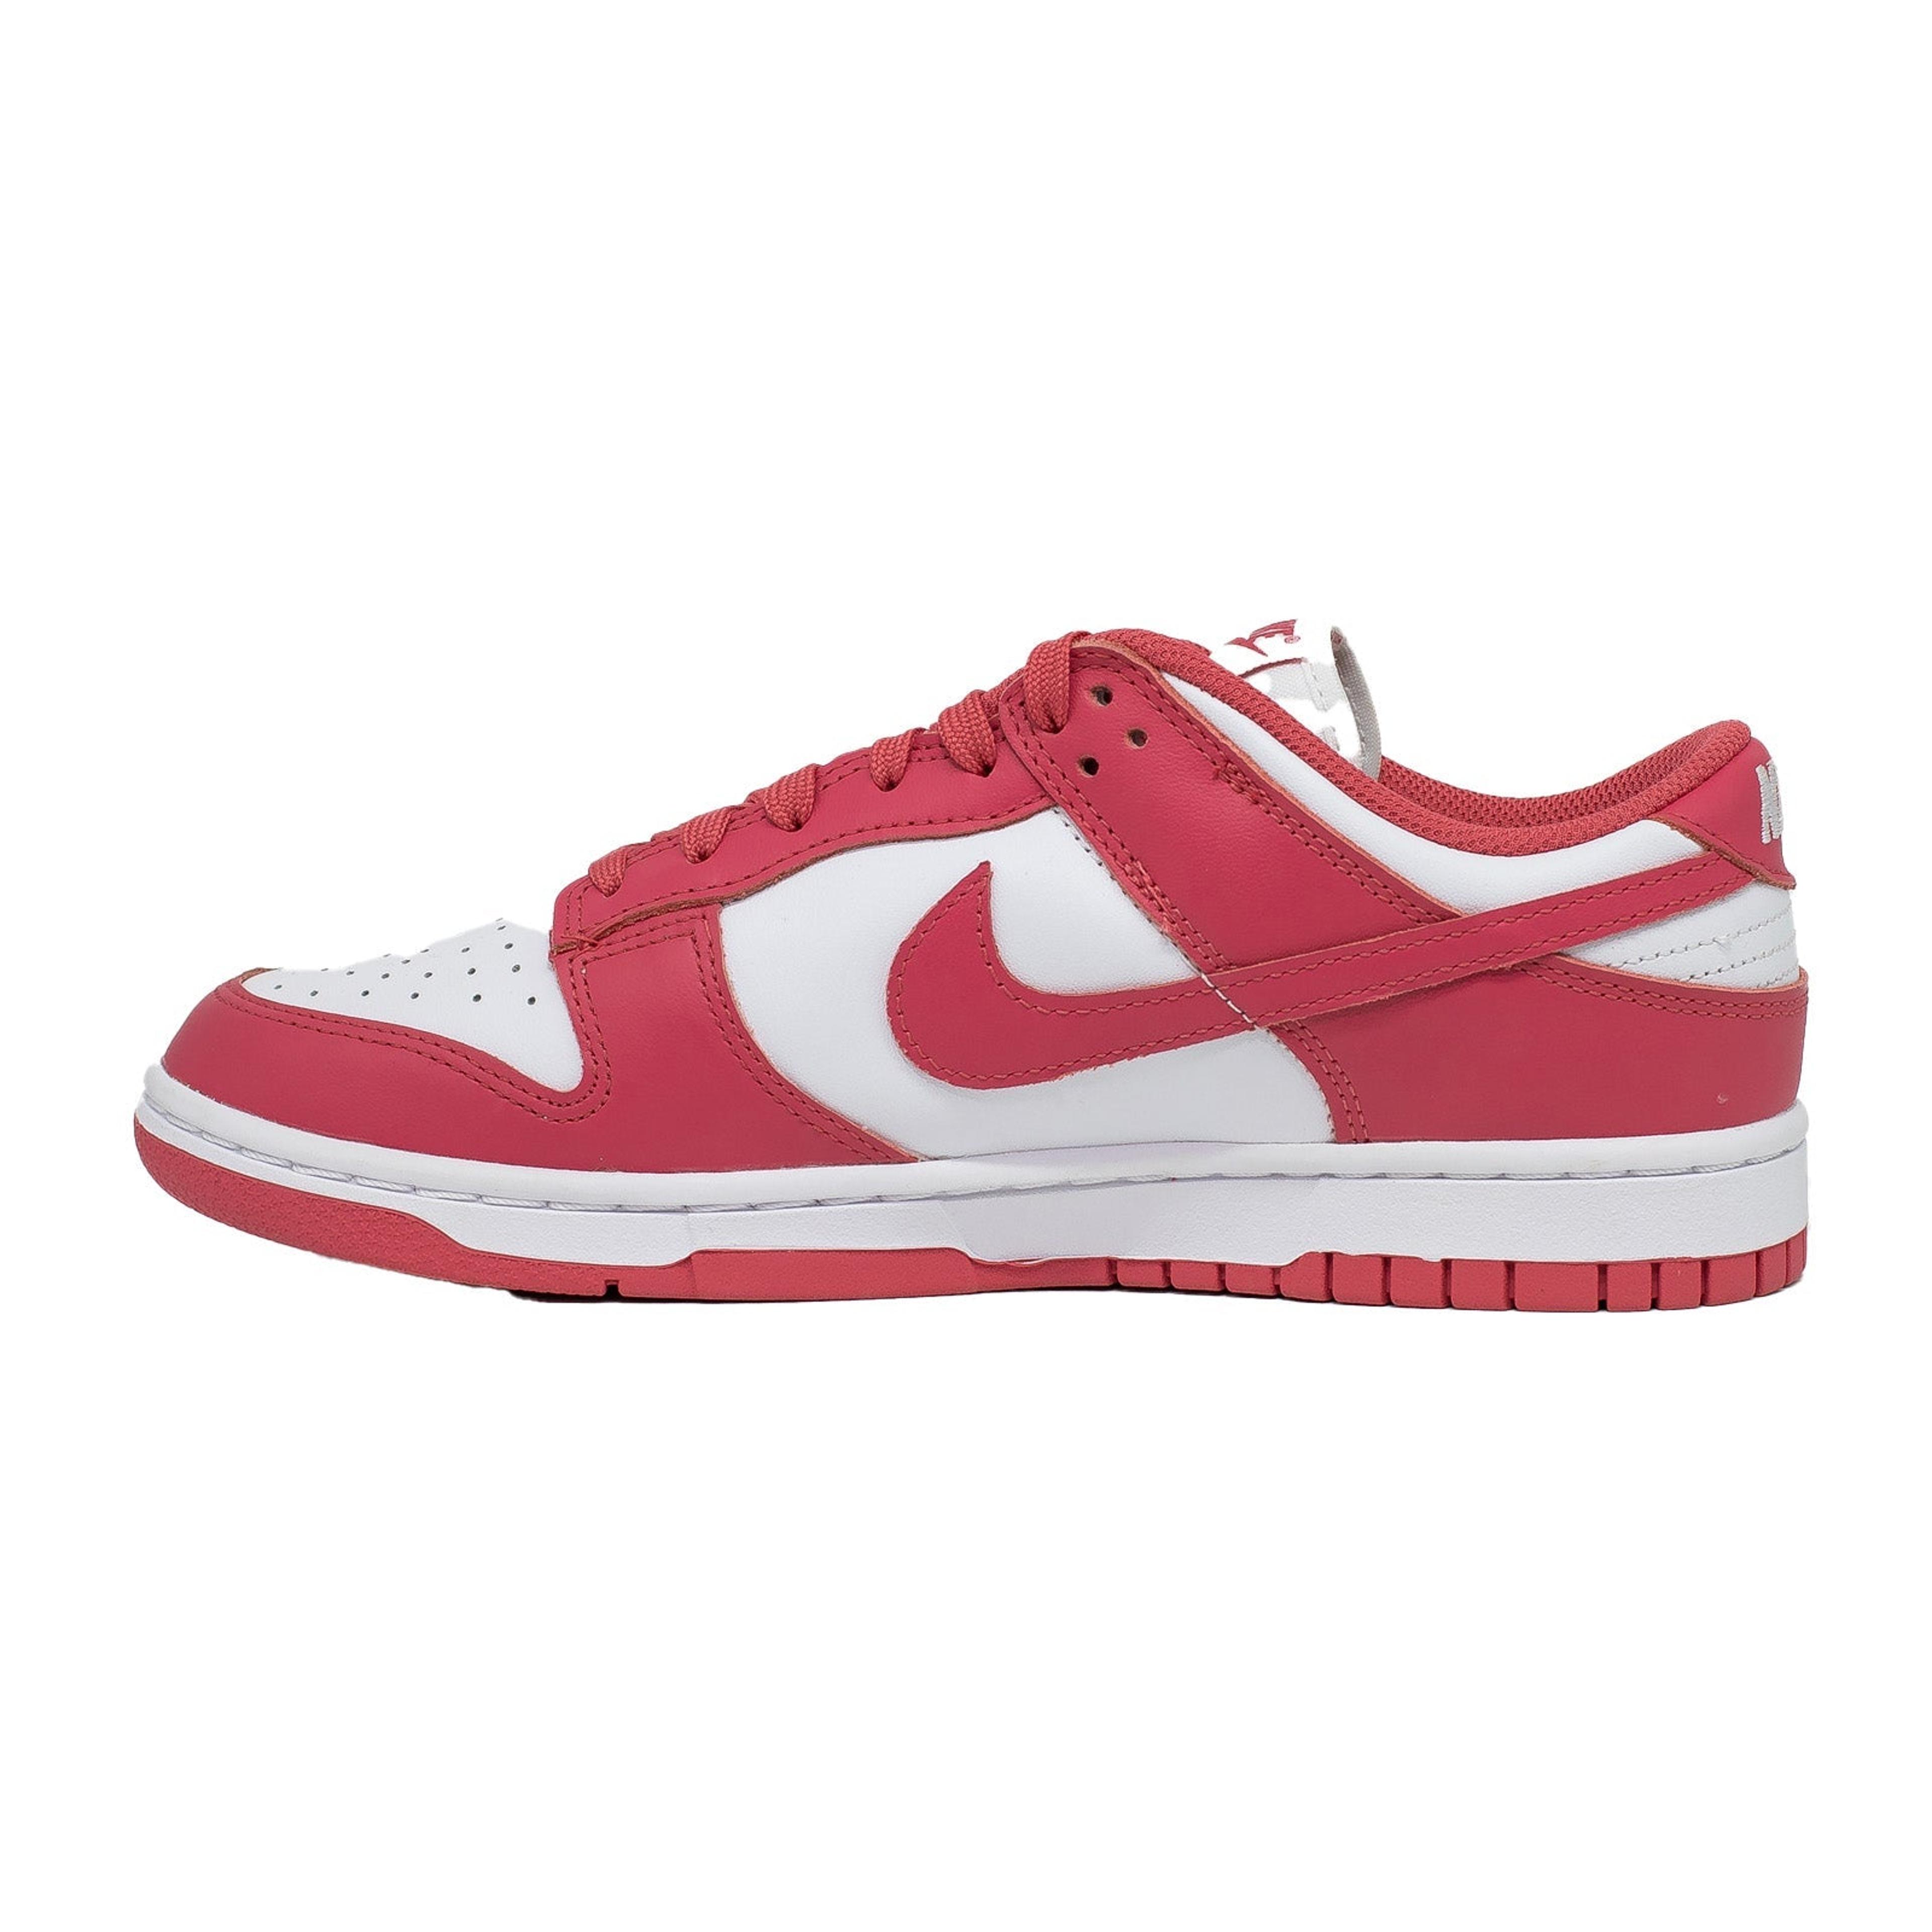 Alternate View 1 of Women's Nike Dunk Low, Archeo Pink